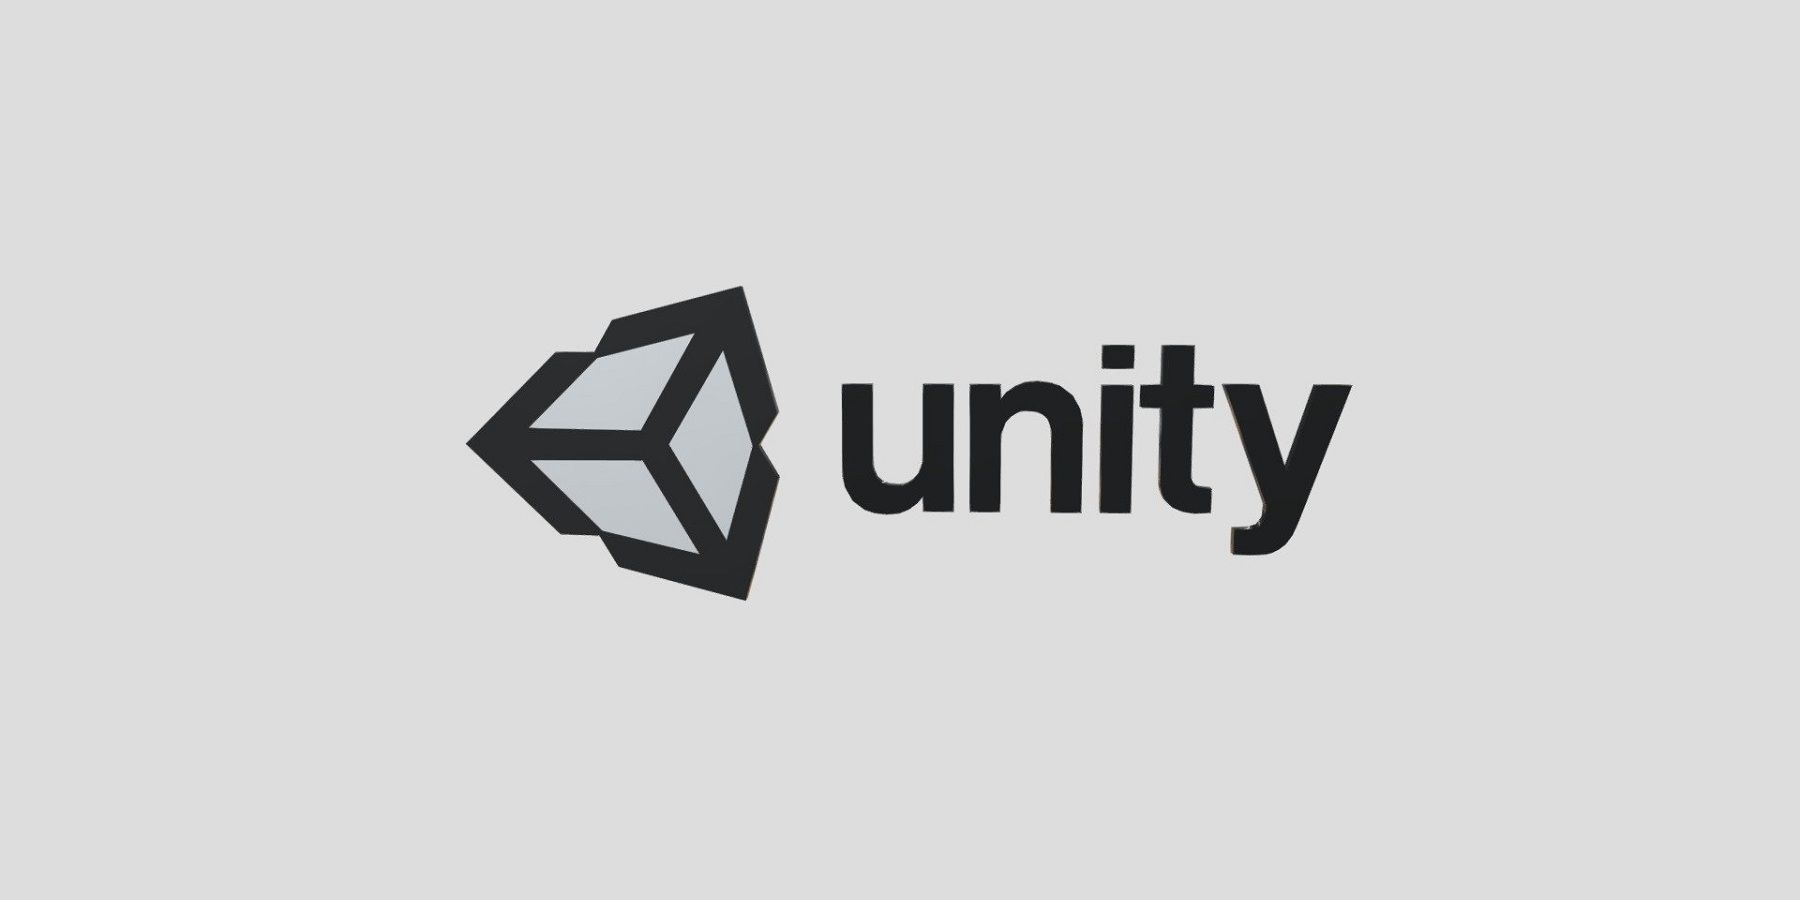 unity-changes-how-fees-work-after-backlash